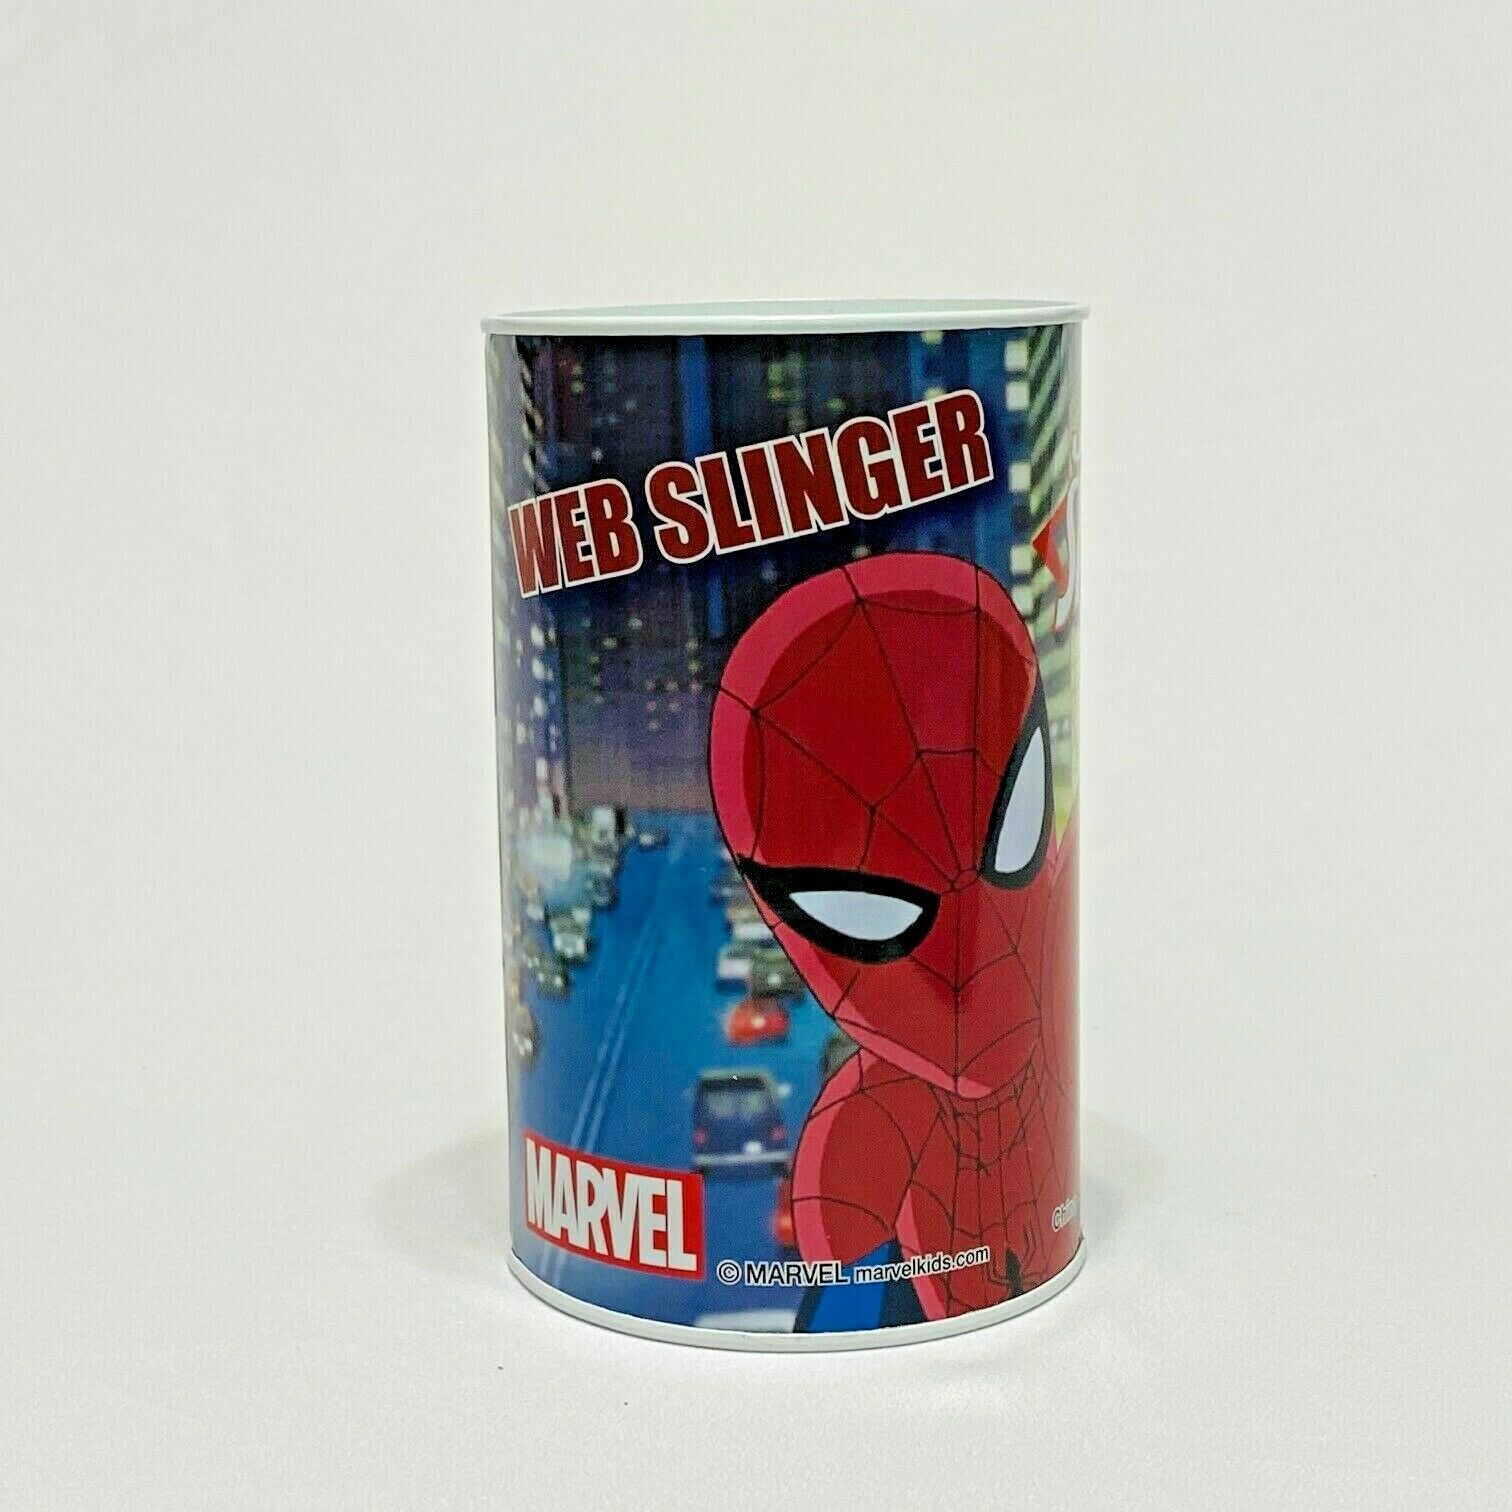 Marvel Ultimate Spider-Man Web Slinger Coin Tin Container Bank, 5 x 3 inches